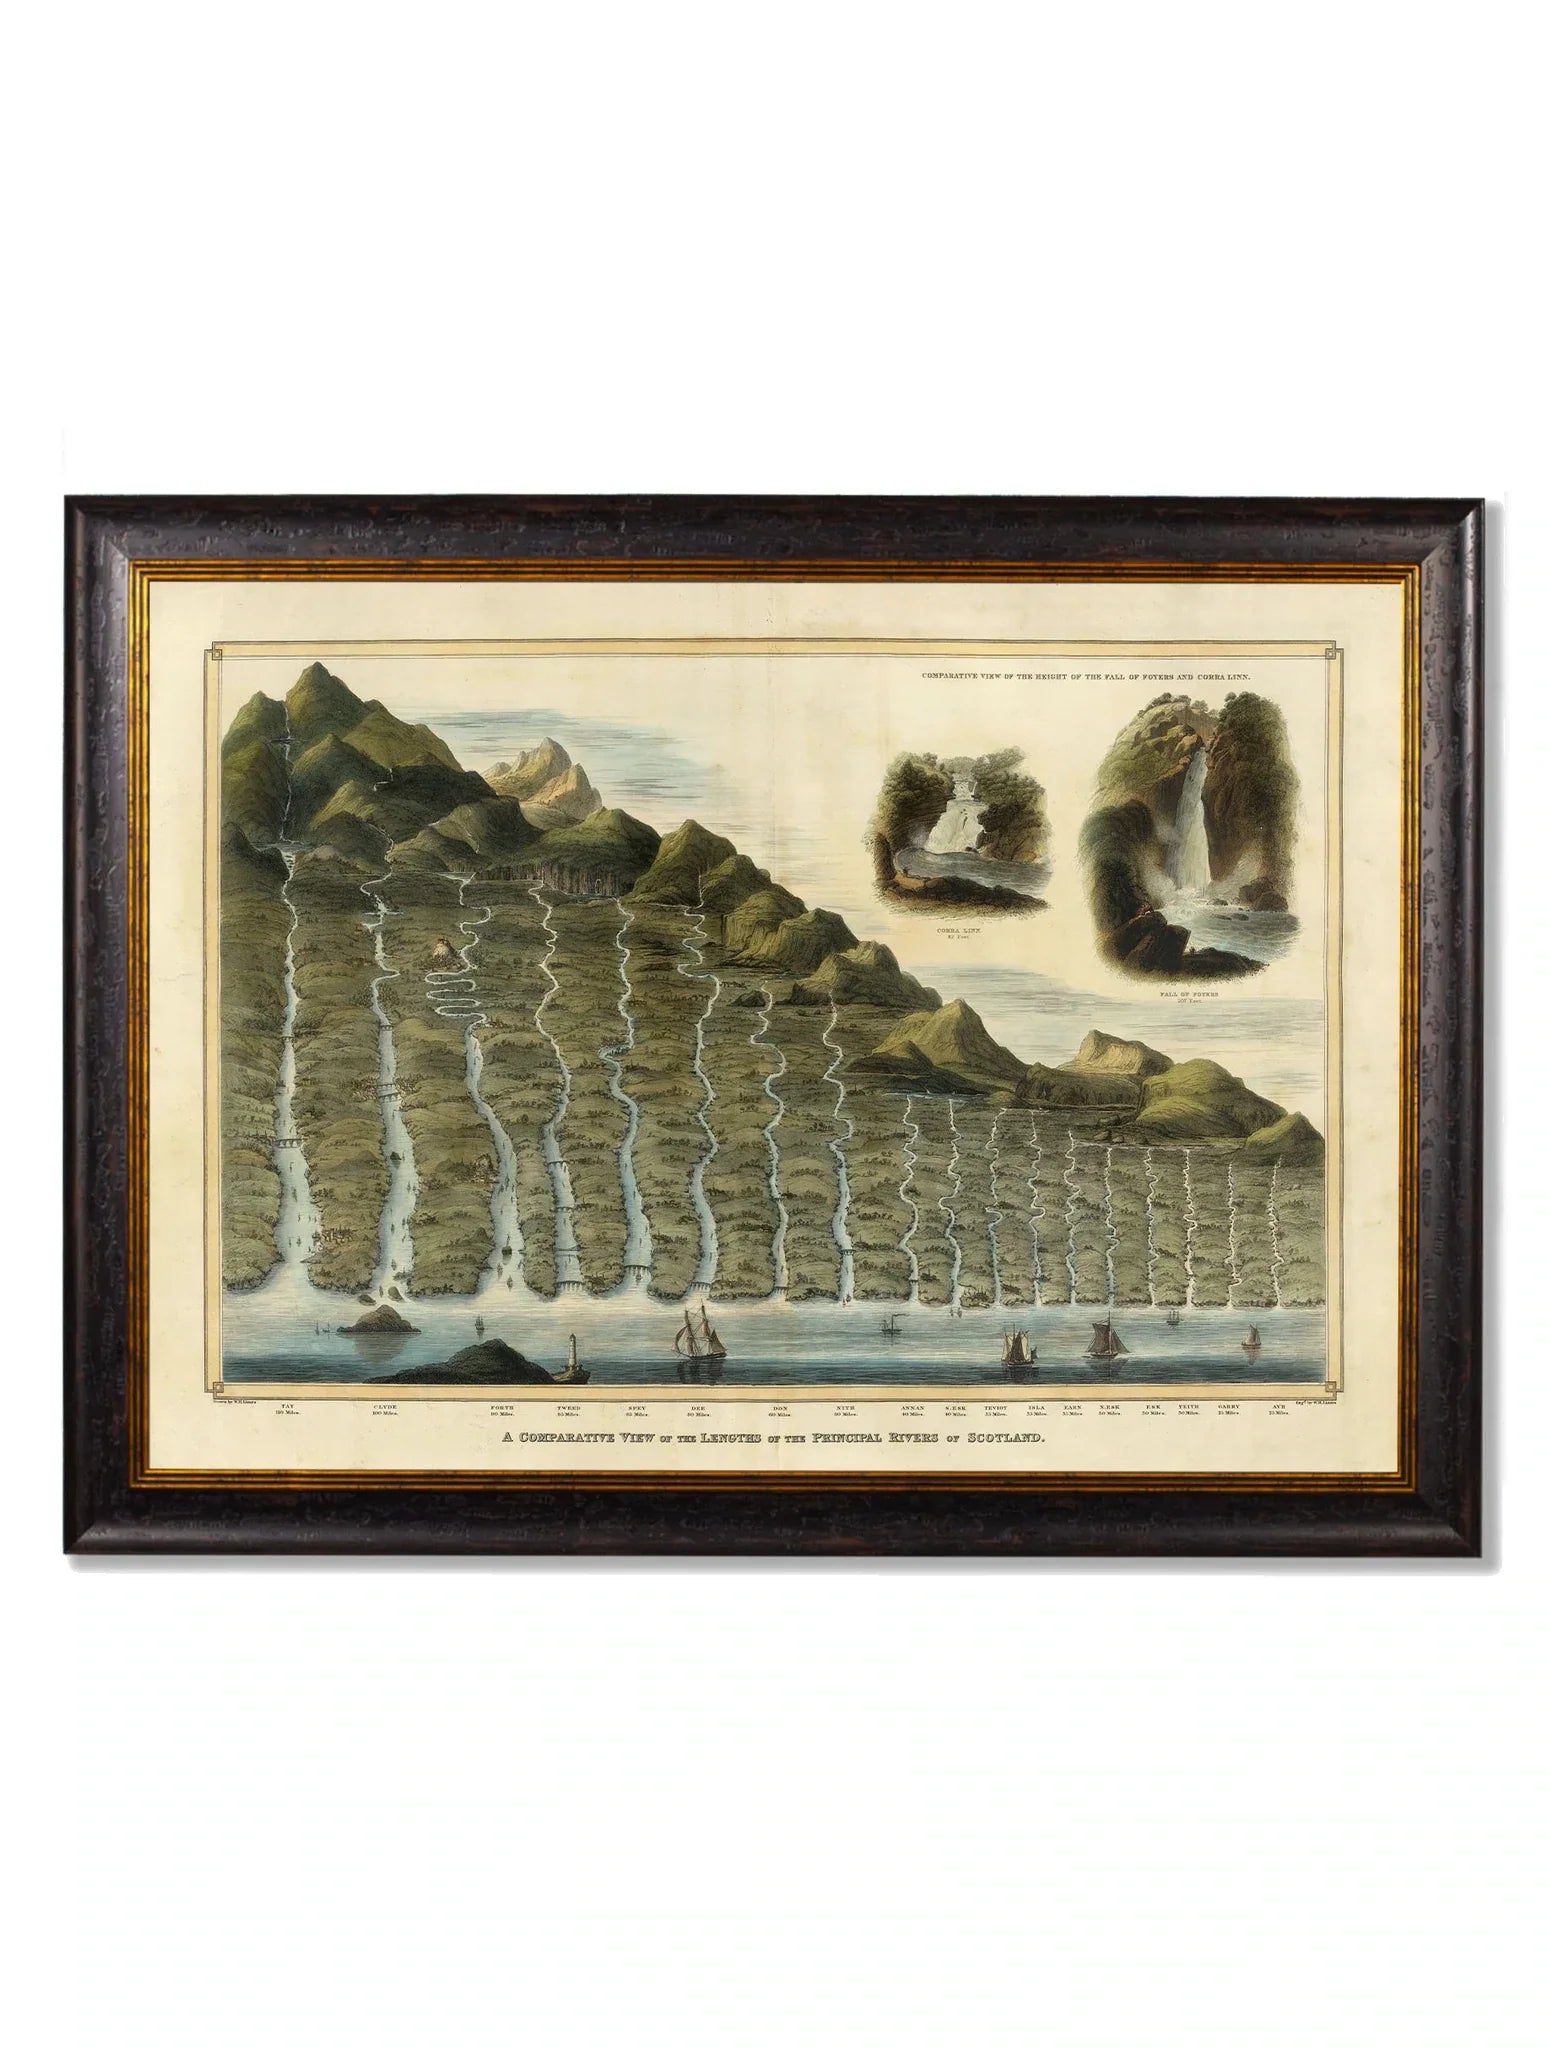 C.1832 Scottish Rivers & Mountains Frame for sale - Woodcock and Cavendish